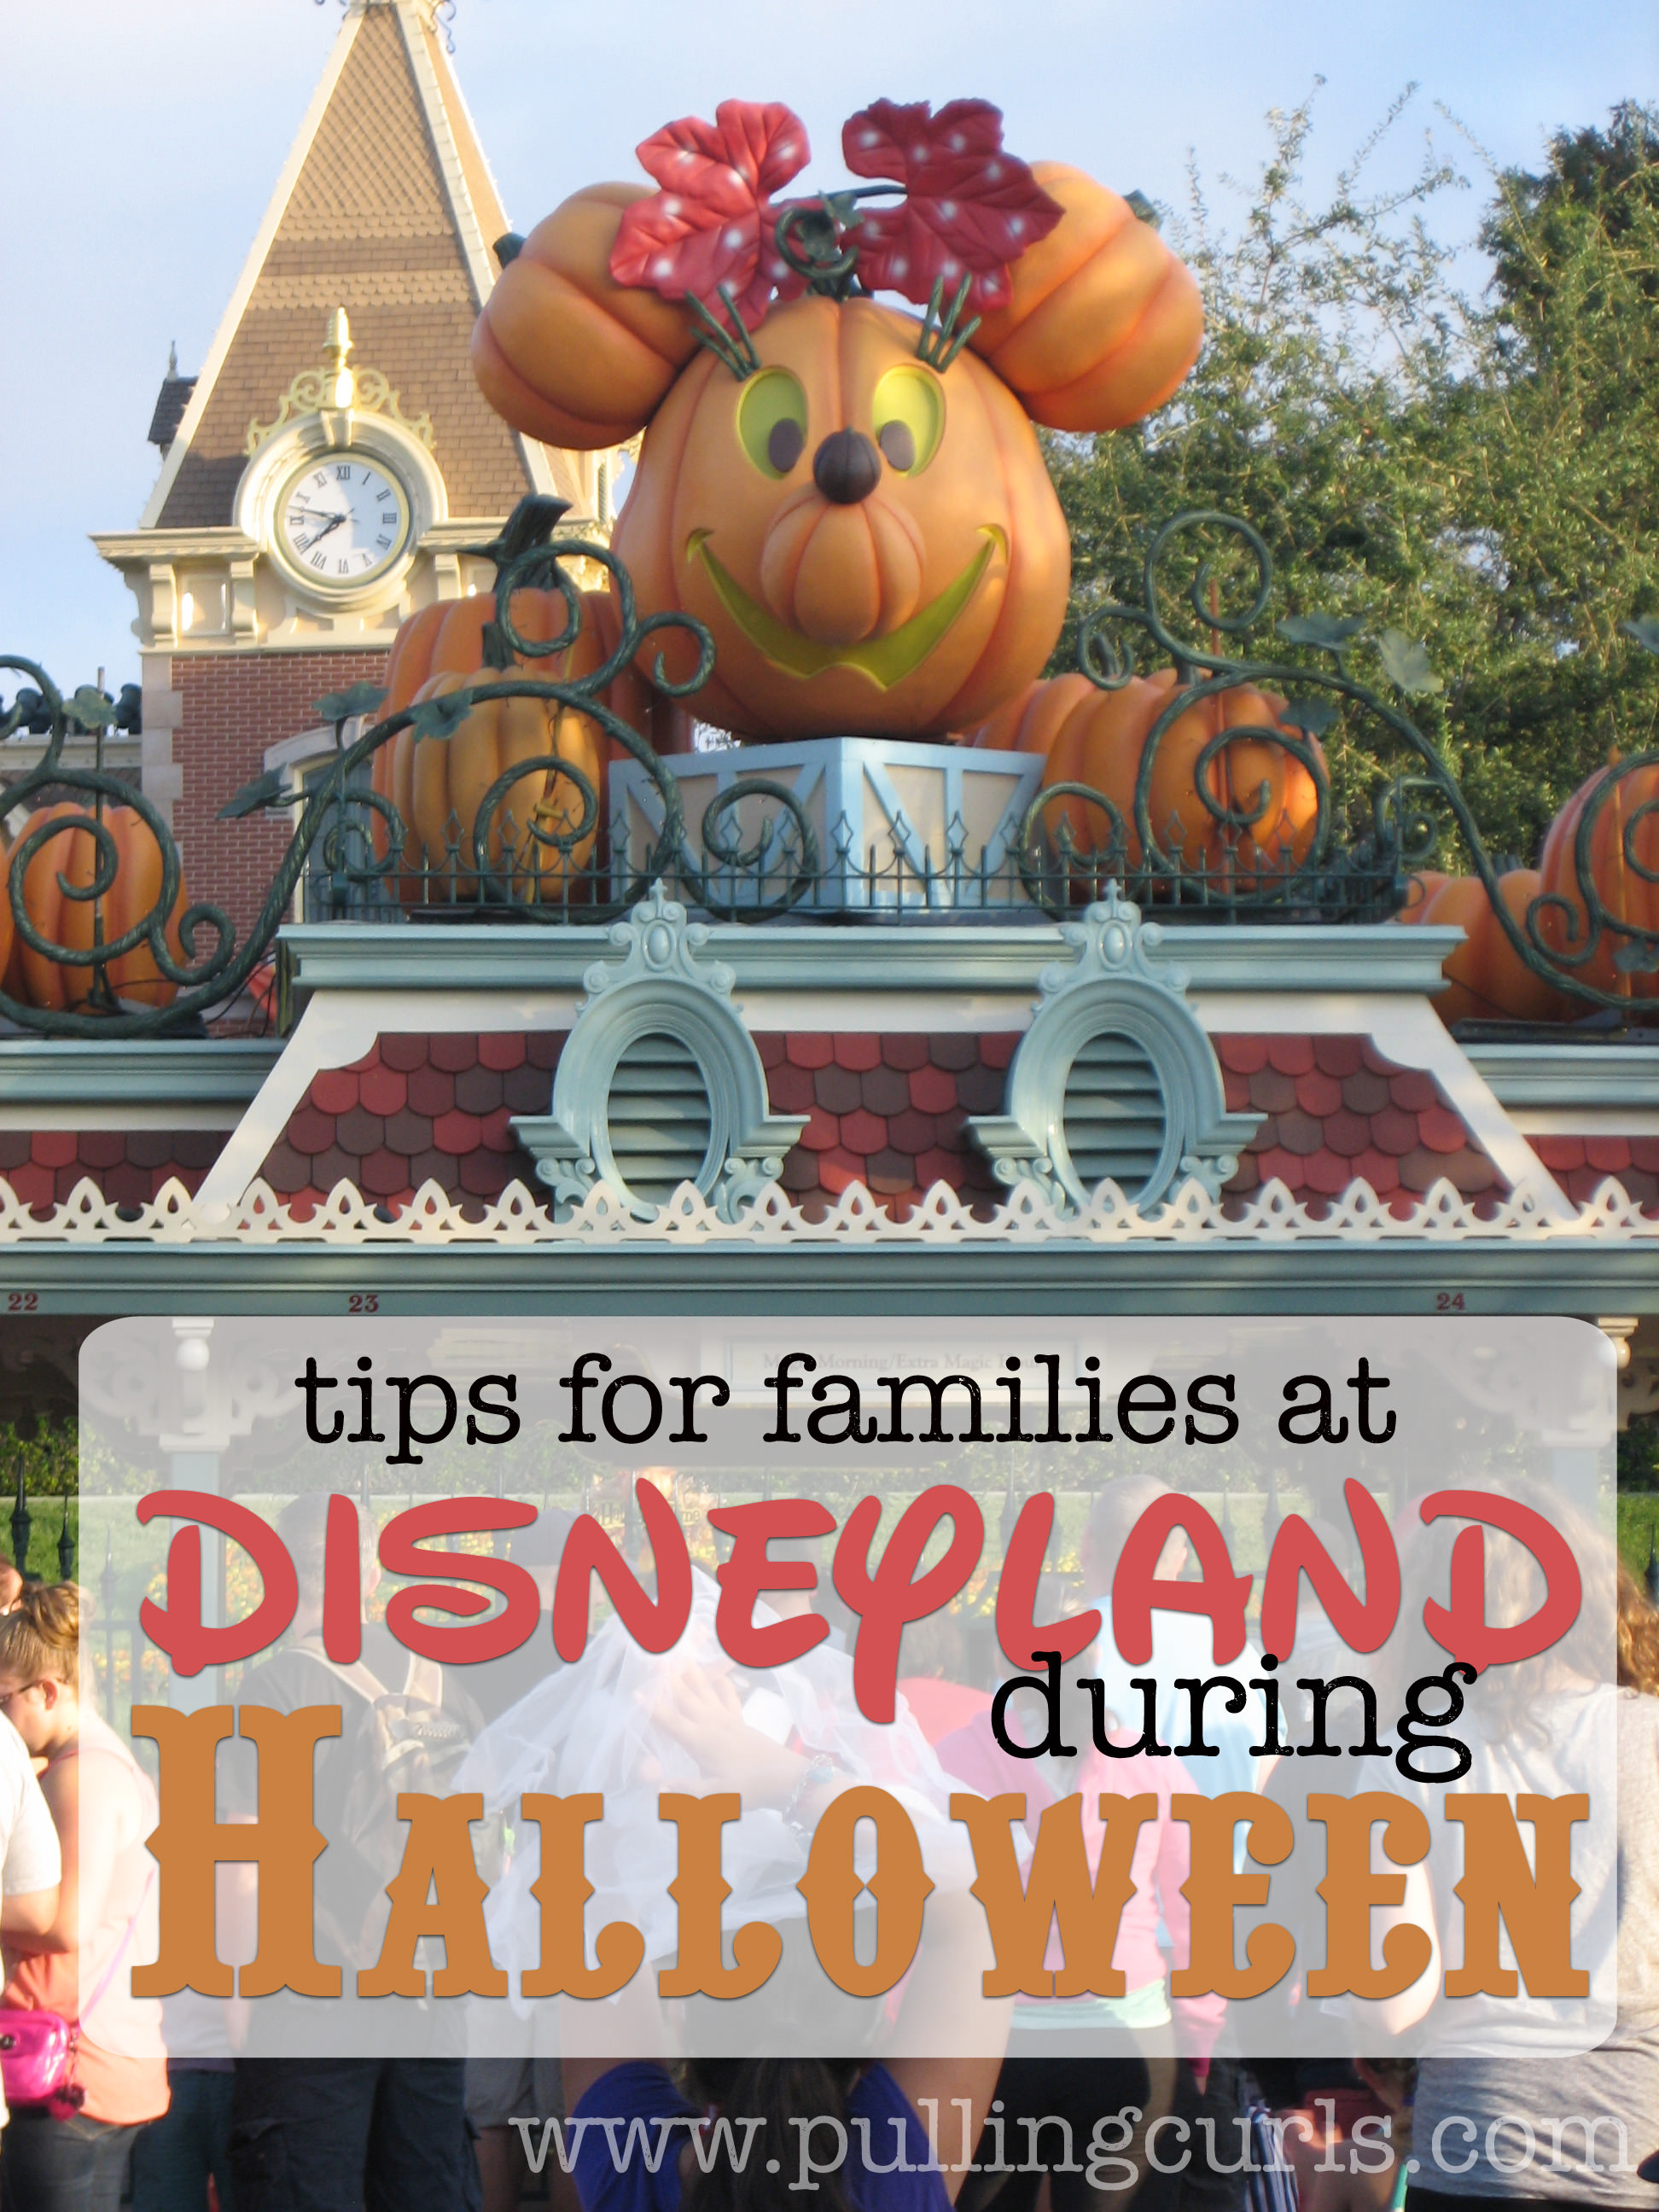 Disneyland at Halloween is a great time to visit the park. Here are 5 things to be aware of before you haunt the park with your family!